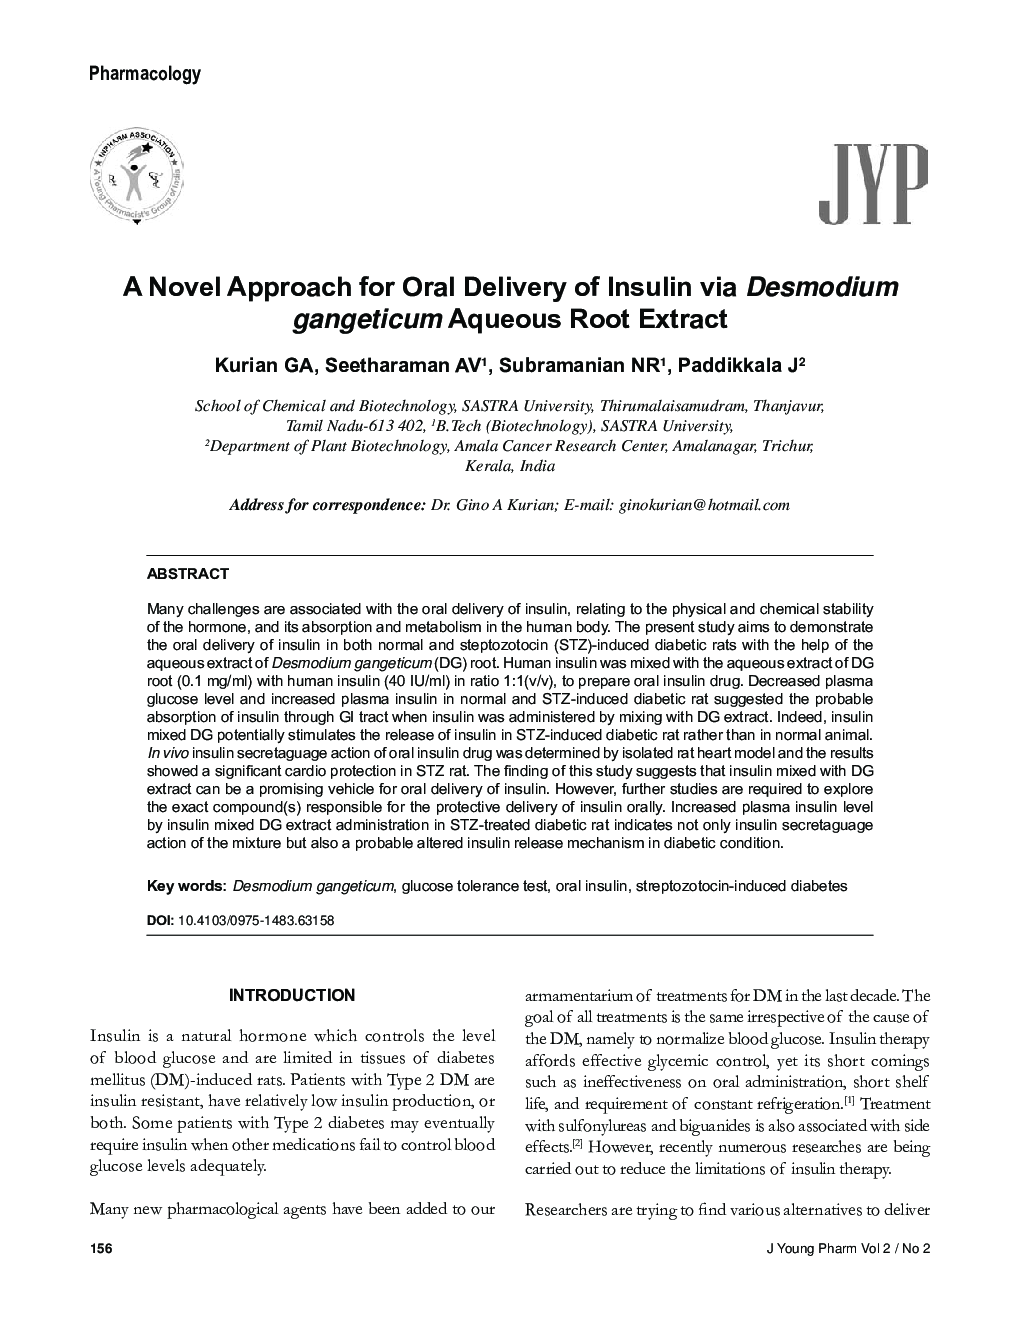 A Novel Approach for Oral Delivery of Insulin via Desmodium gangeticum Aqueous Root Extract